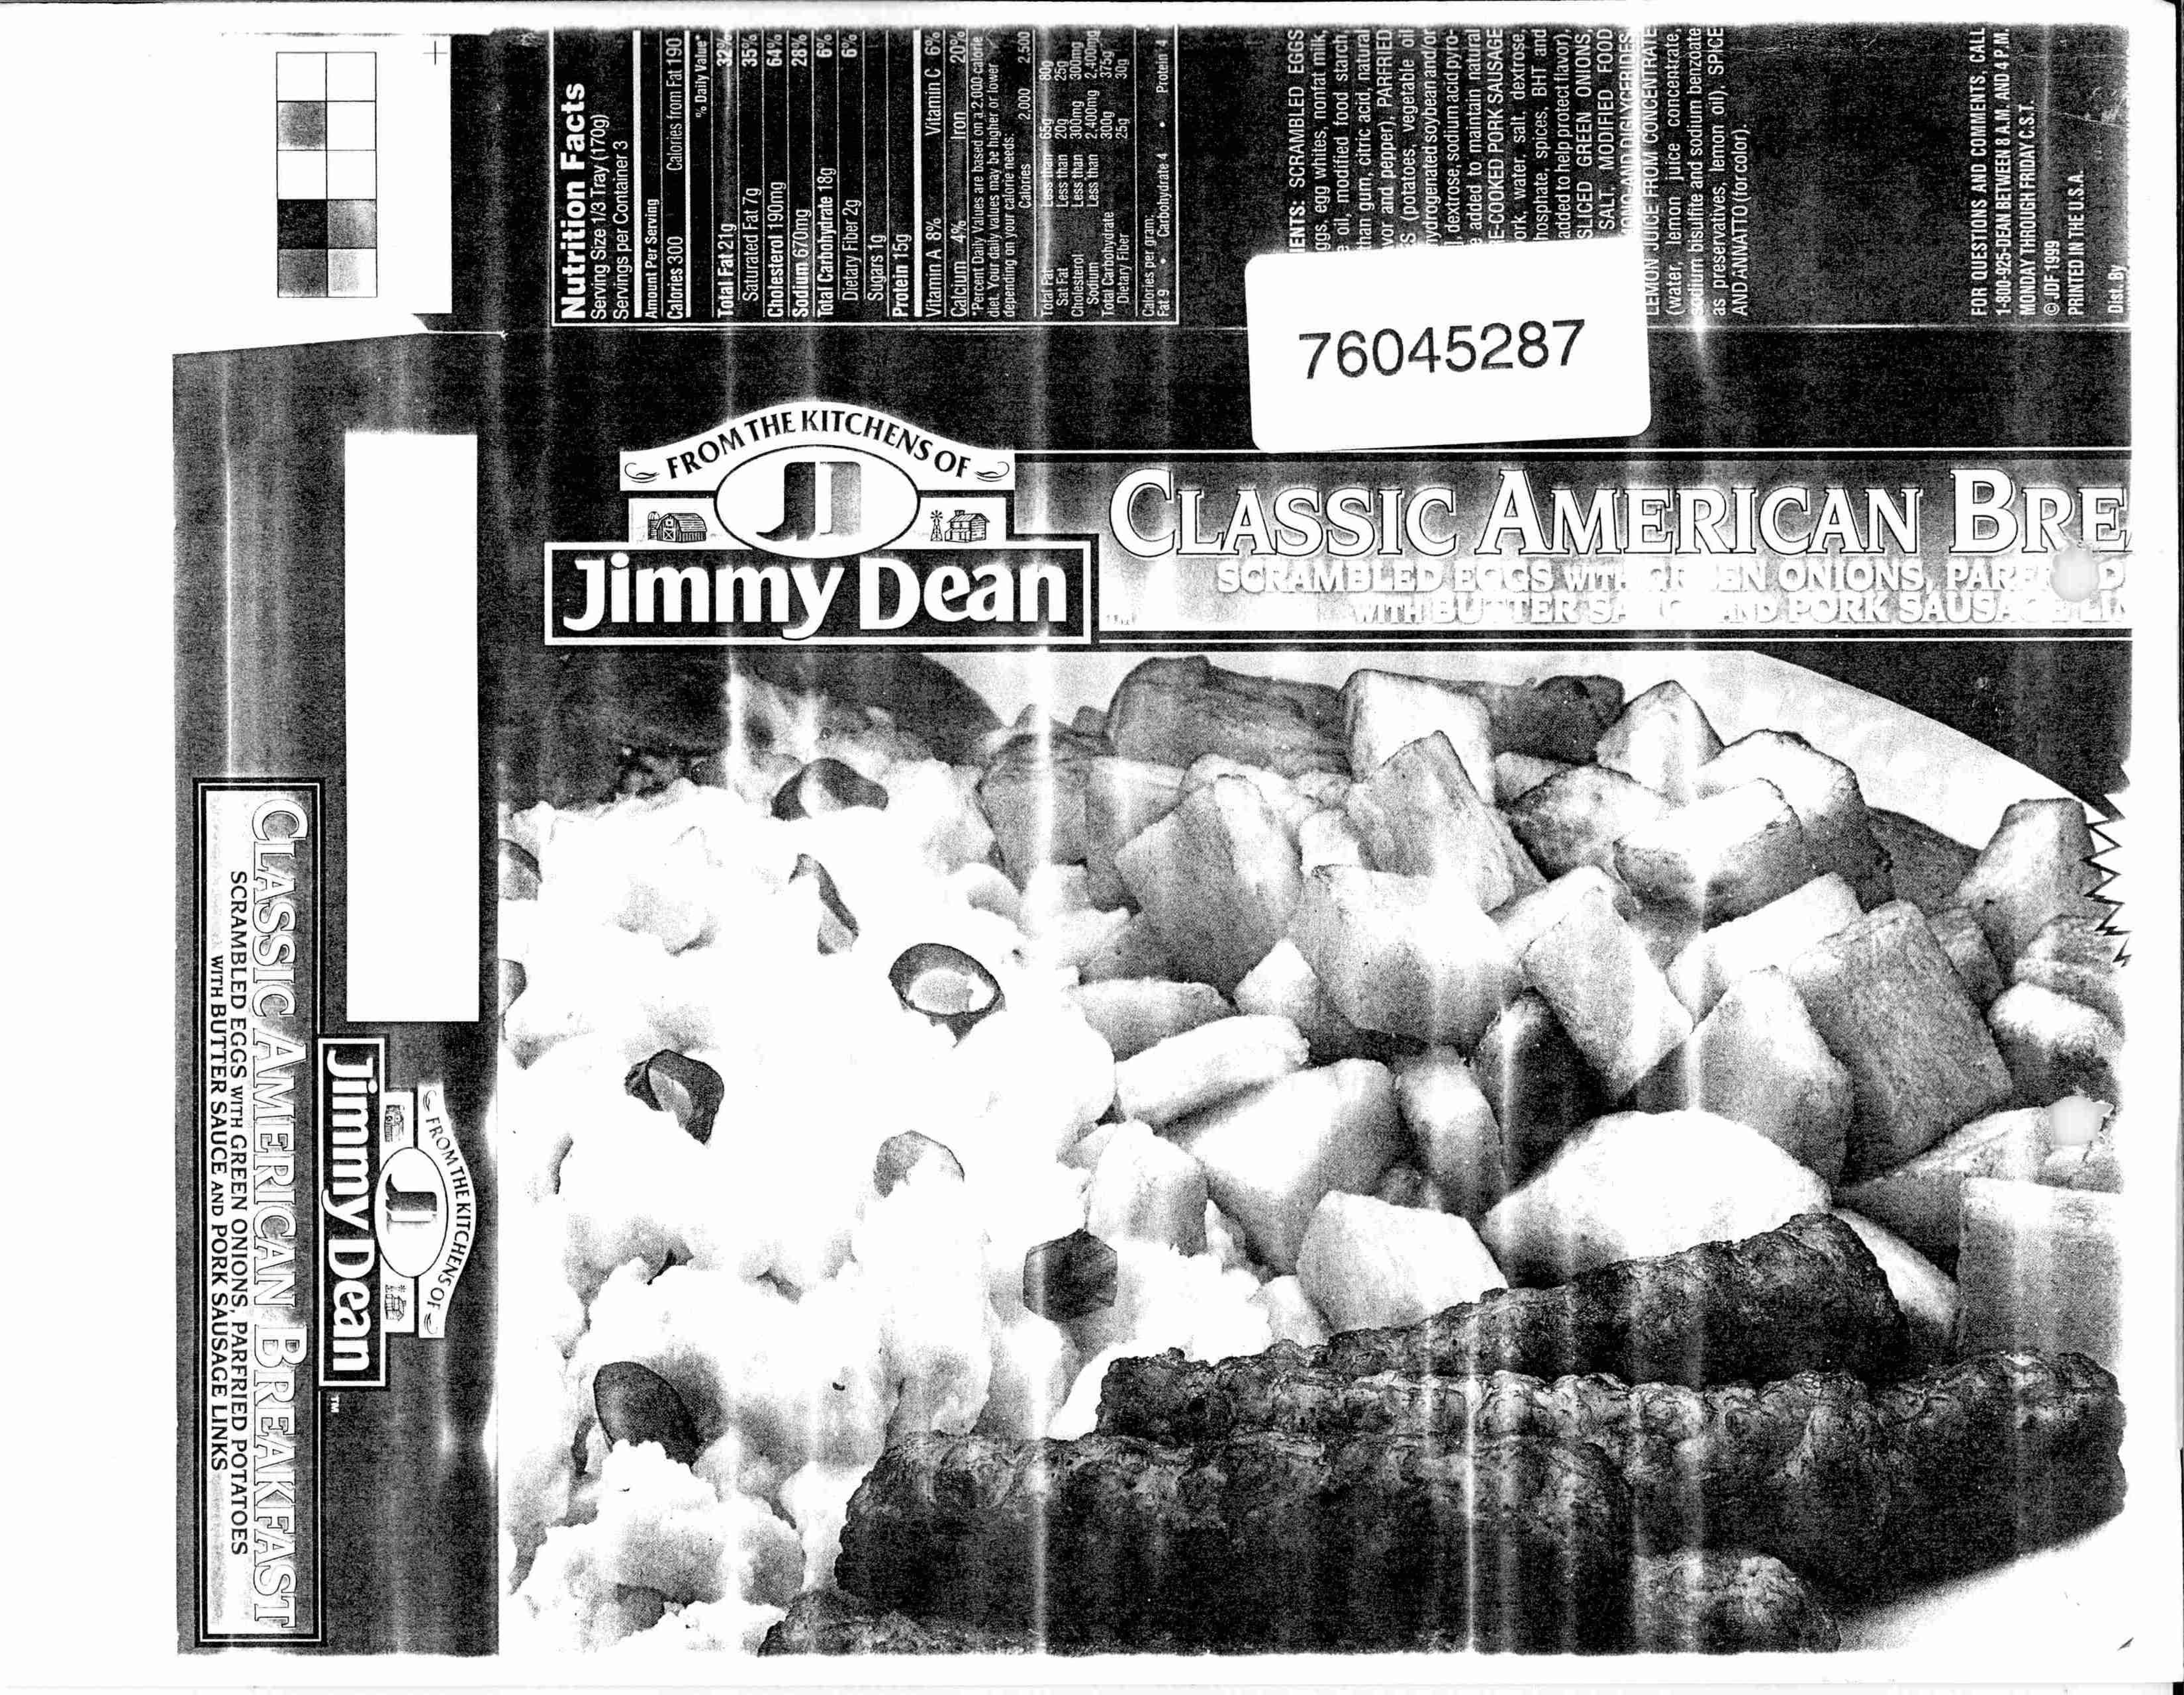  FROM THE KITCHENS OF JIMMY DEAN CLASSICAMERICAN BREAKFAST